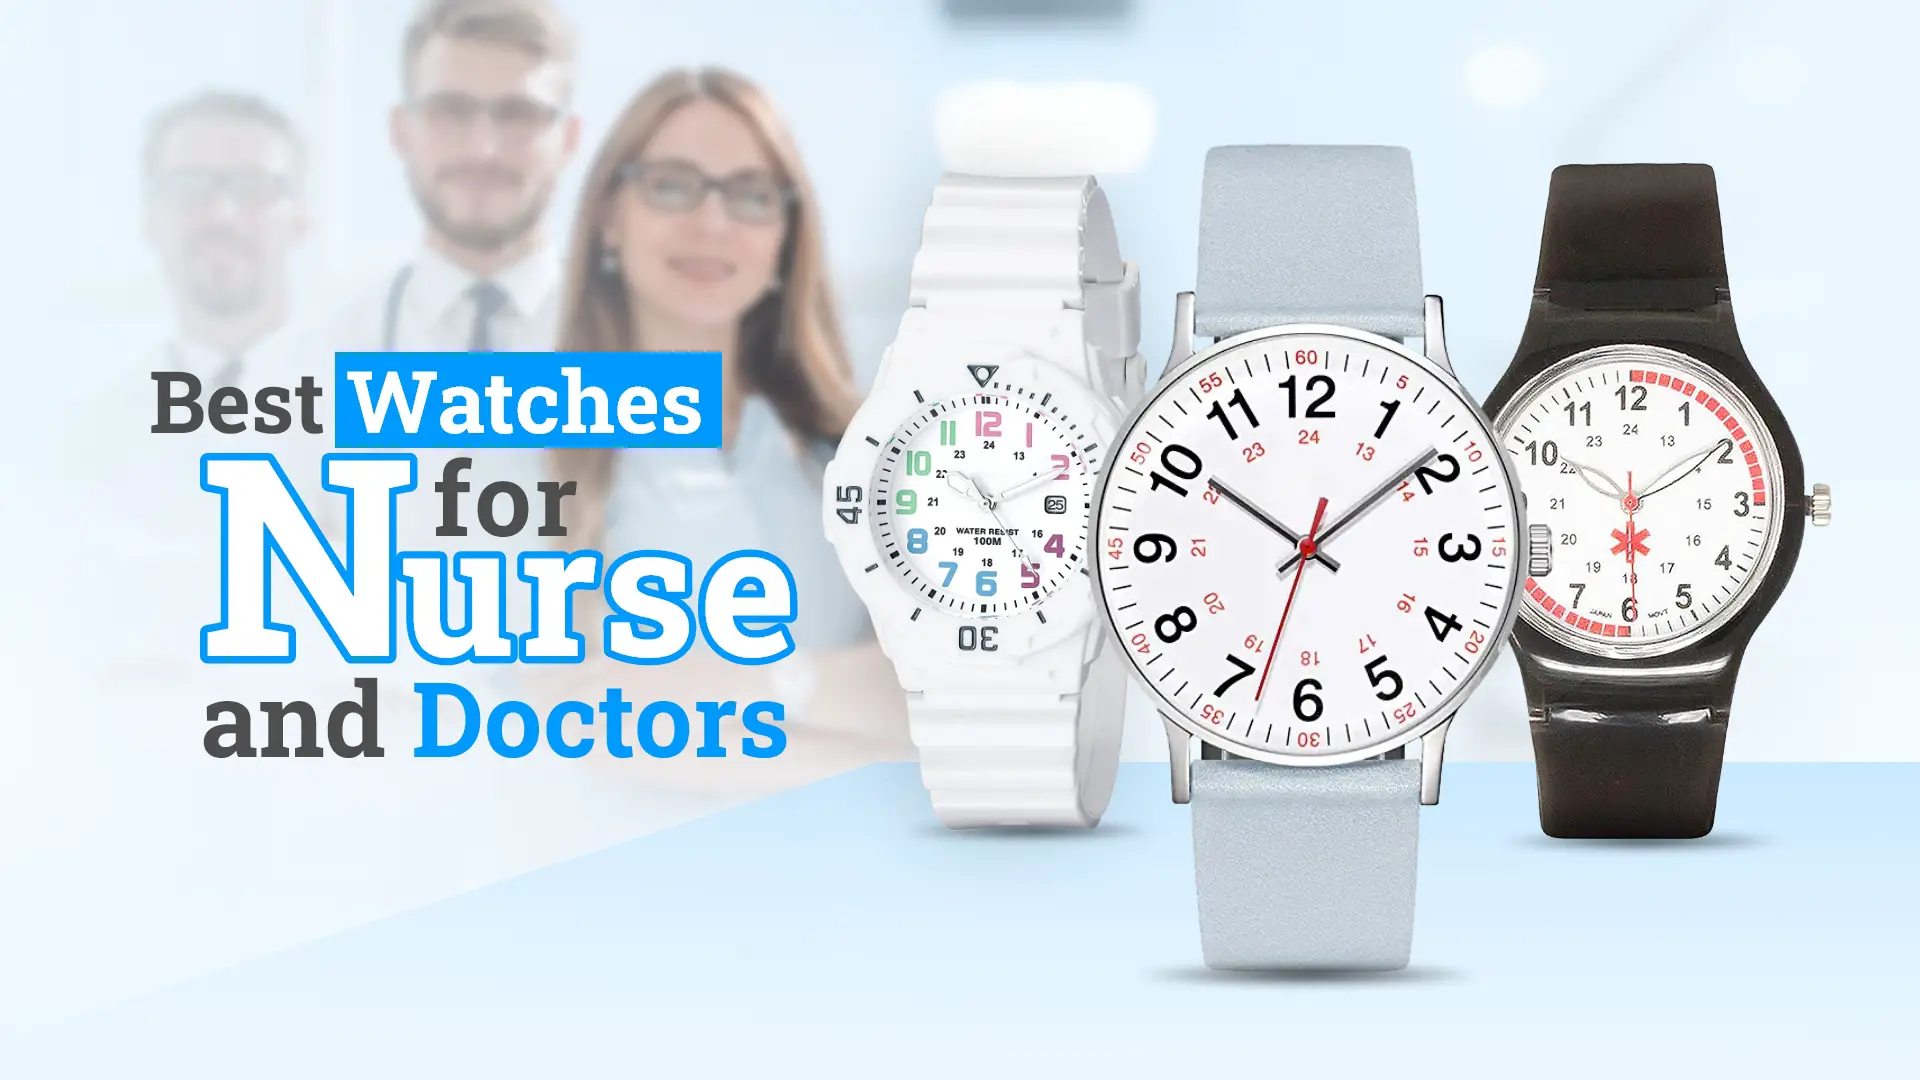 13 Best Watches for nurses